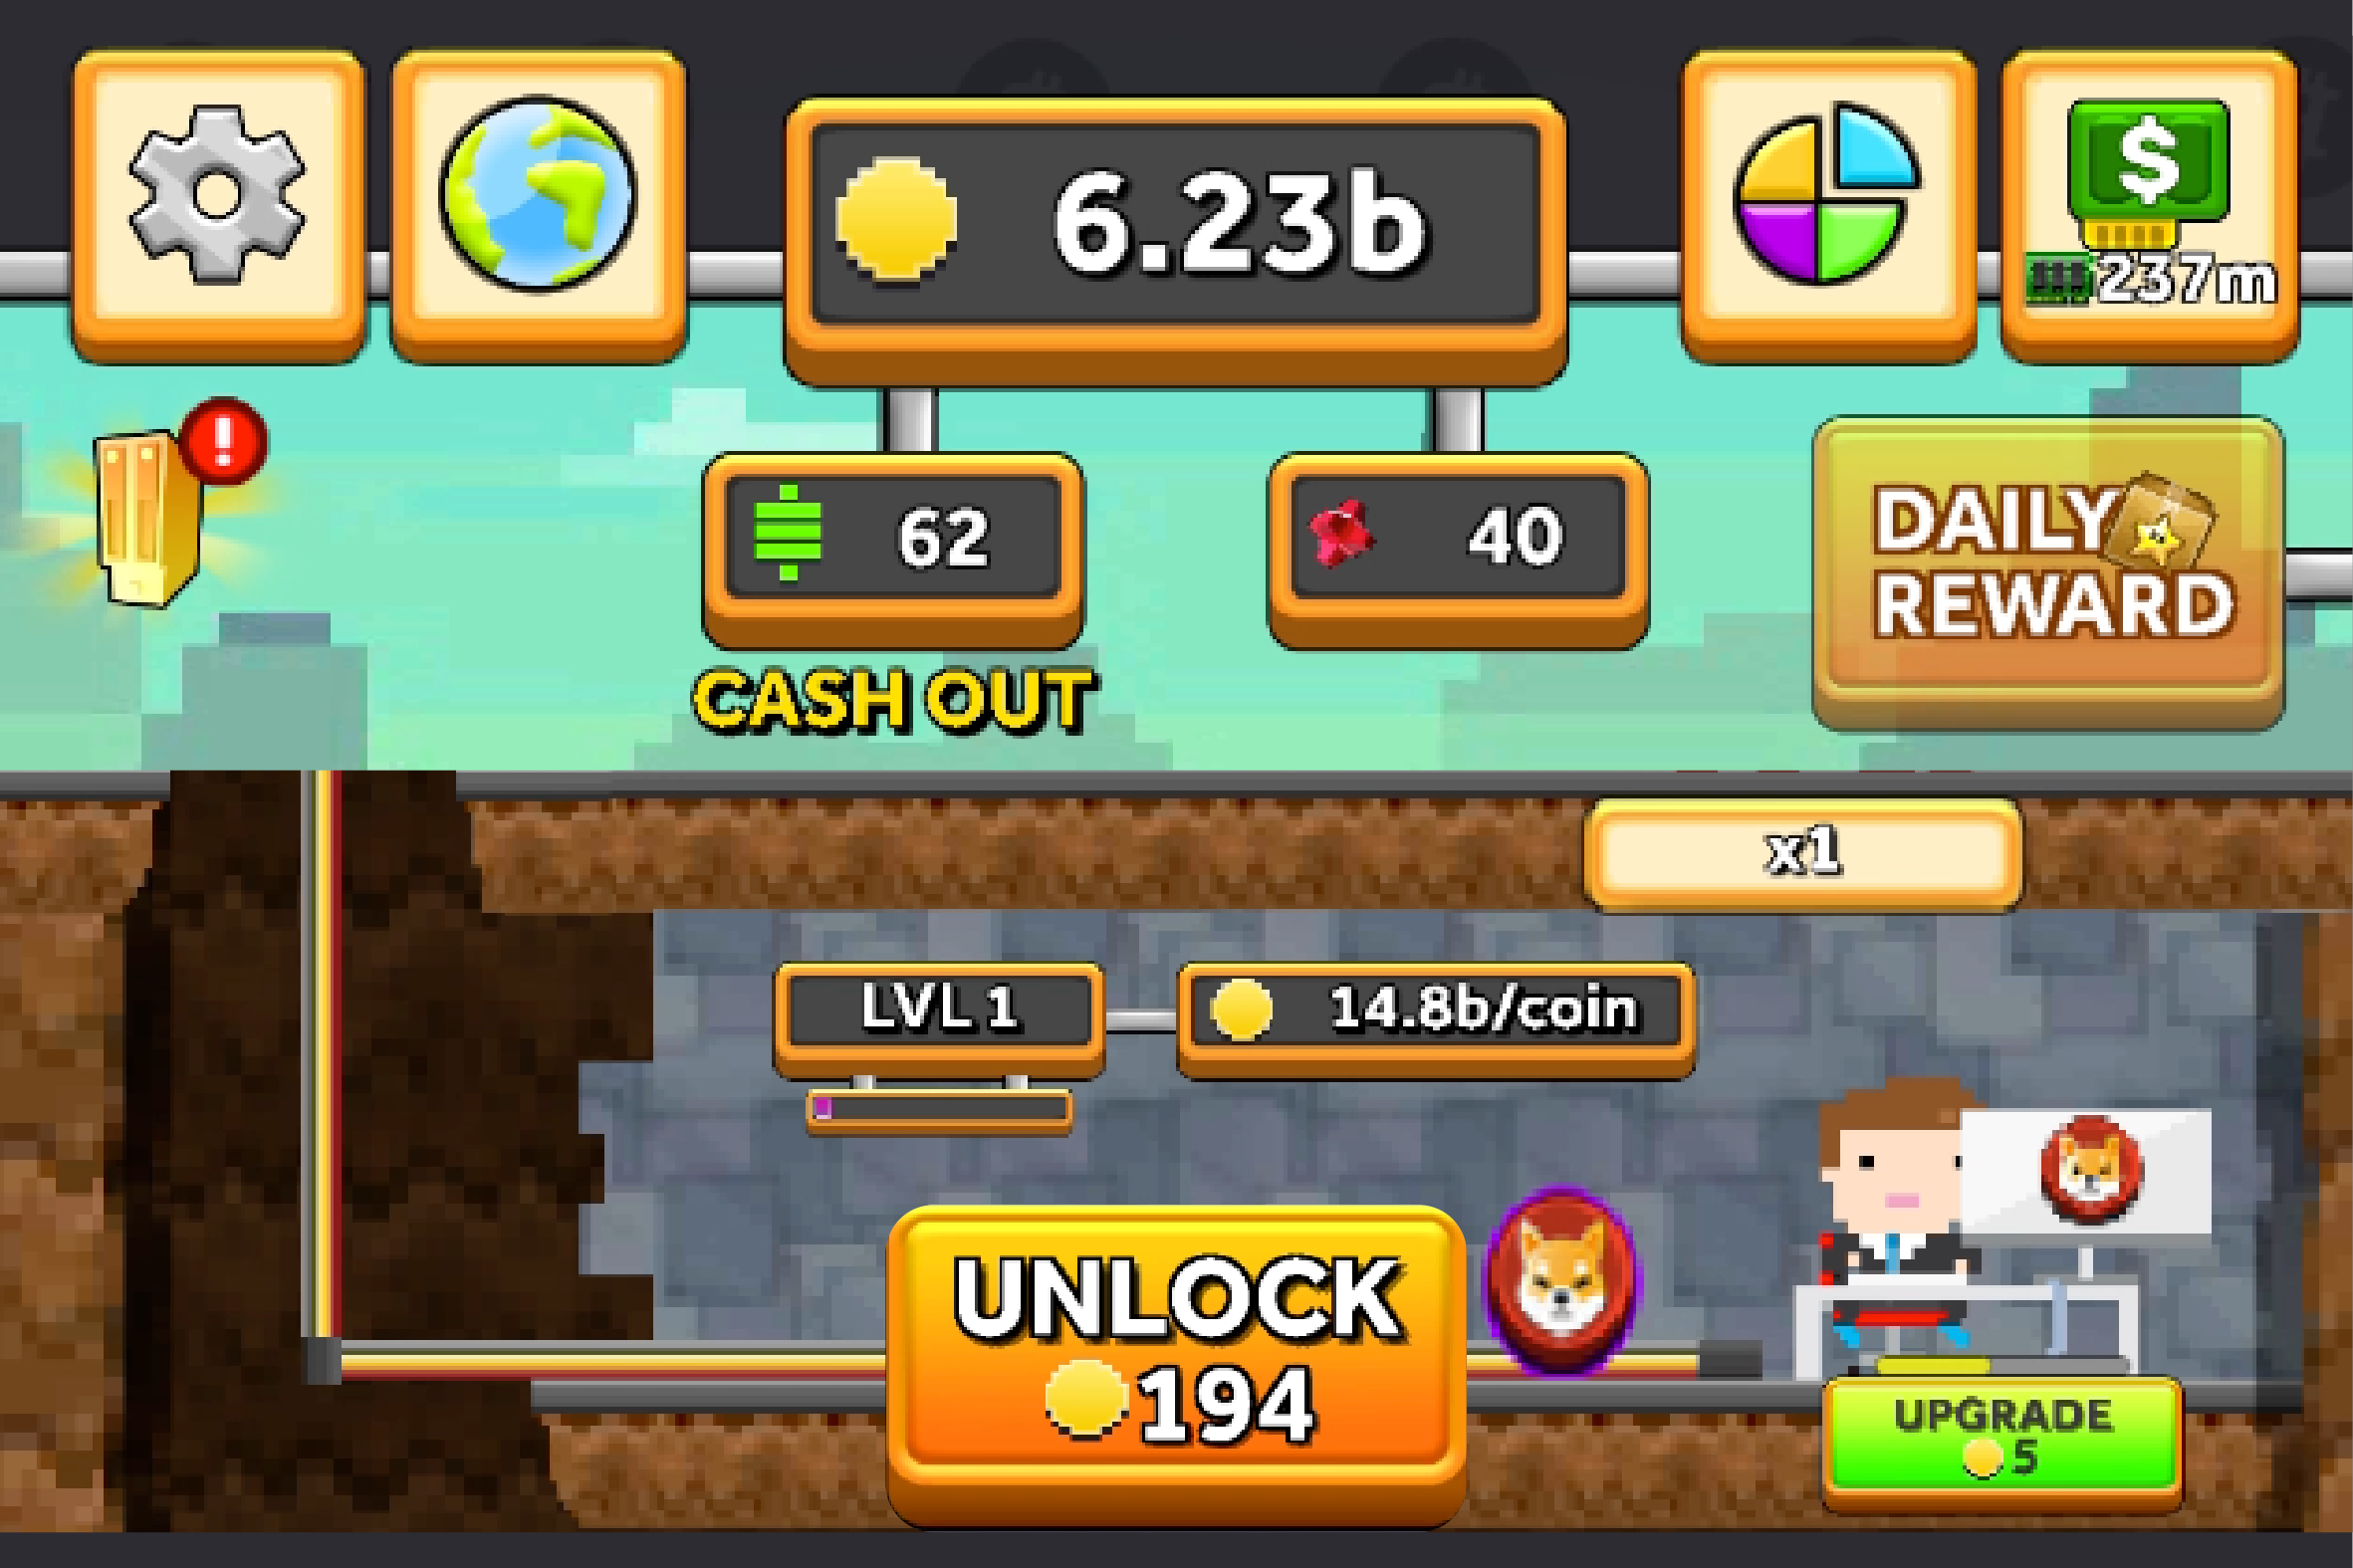 Want to play games and earn crypto. Then check out Crypto Mining games